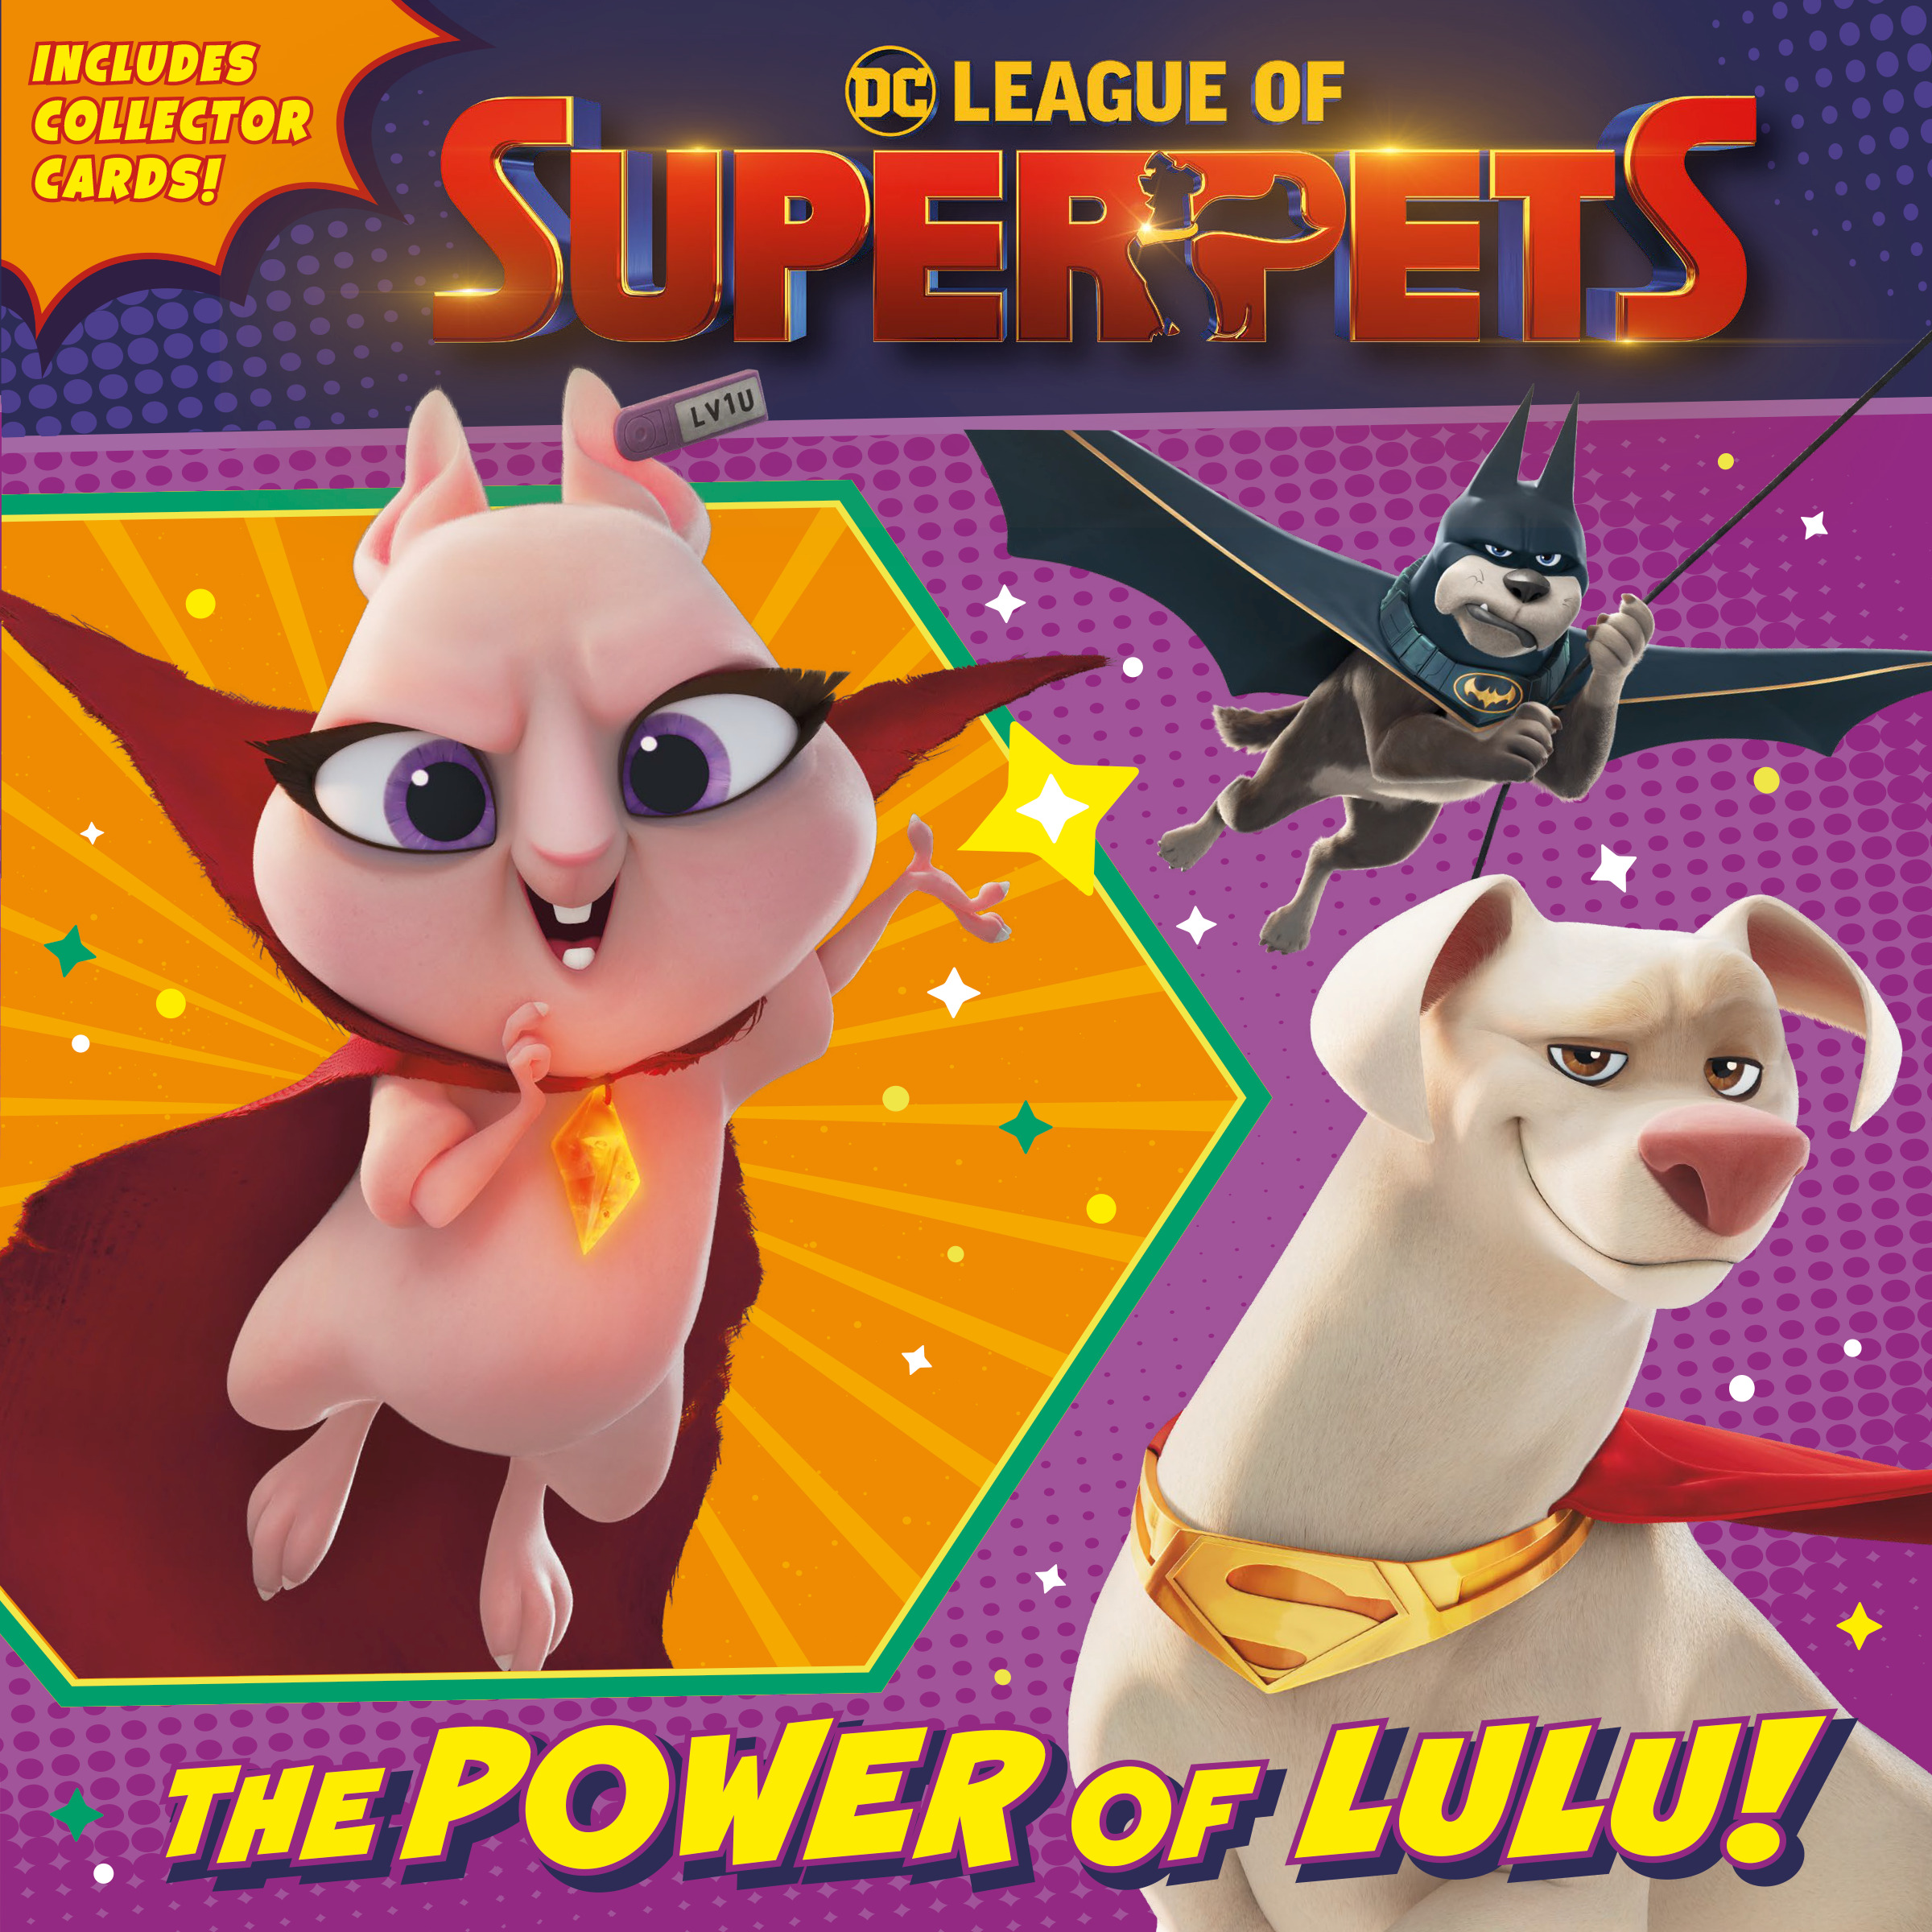 DC League of Super-Pets - The Power of Lulu!  : Includes collector cards! | Chlebowski, Rachel